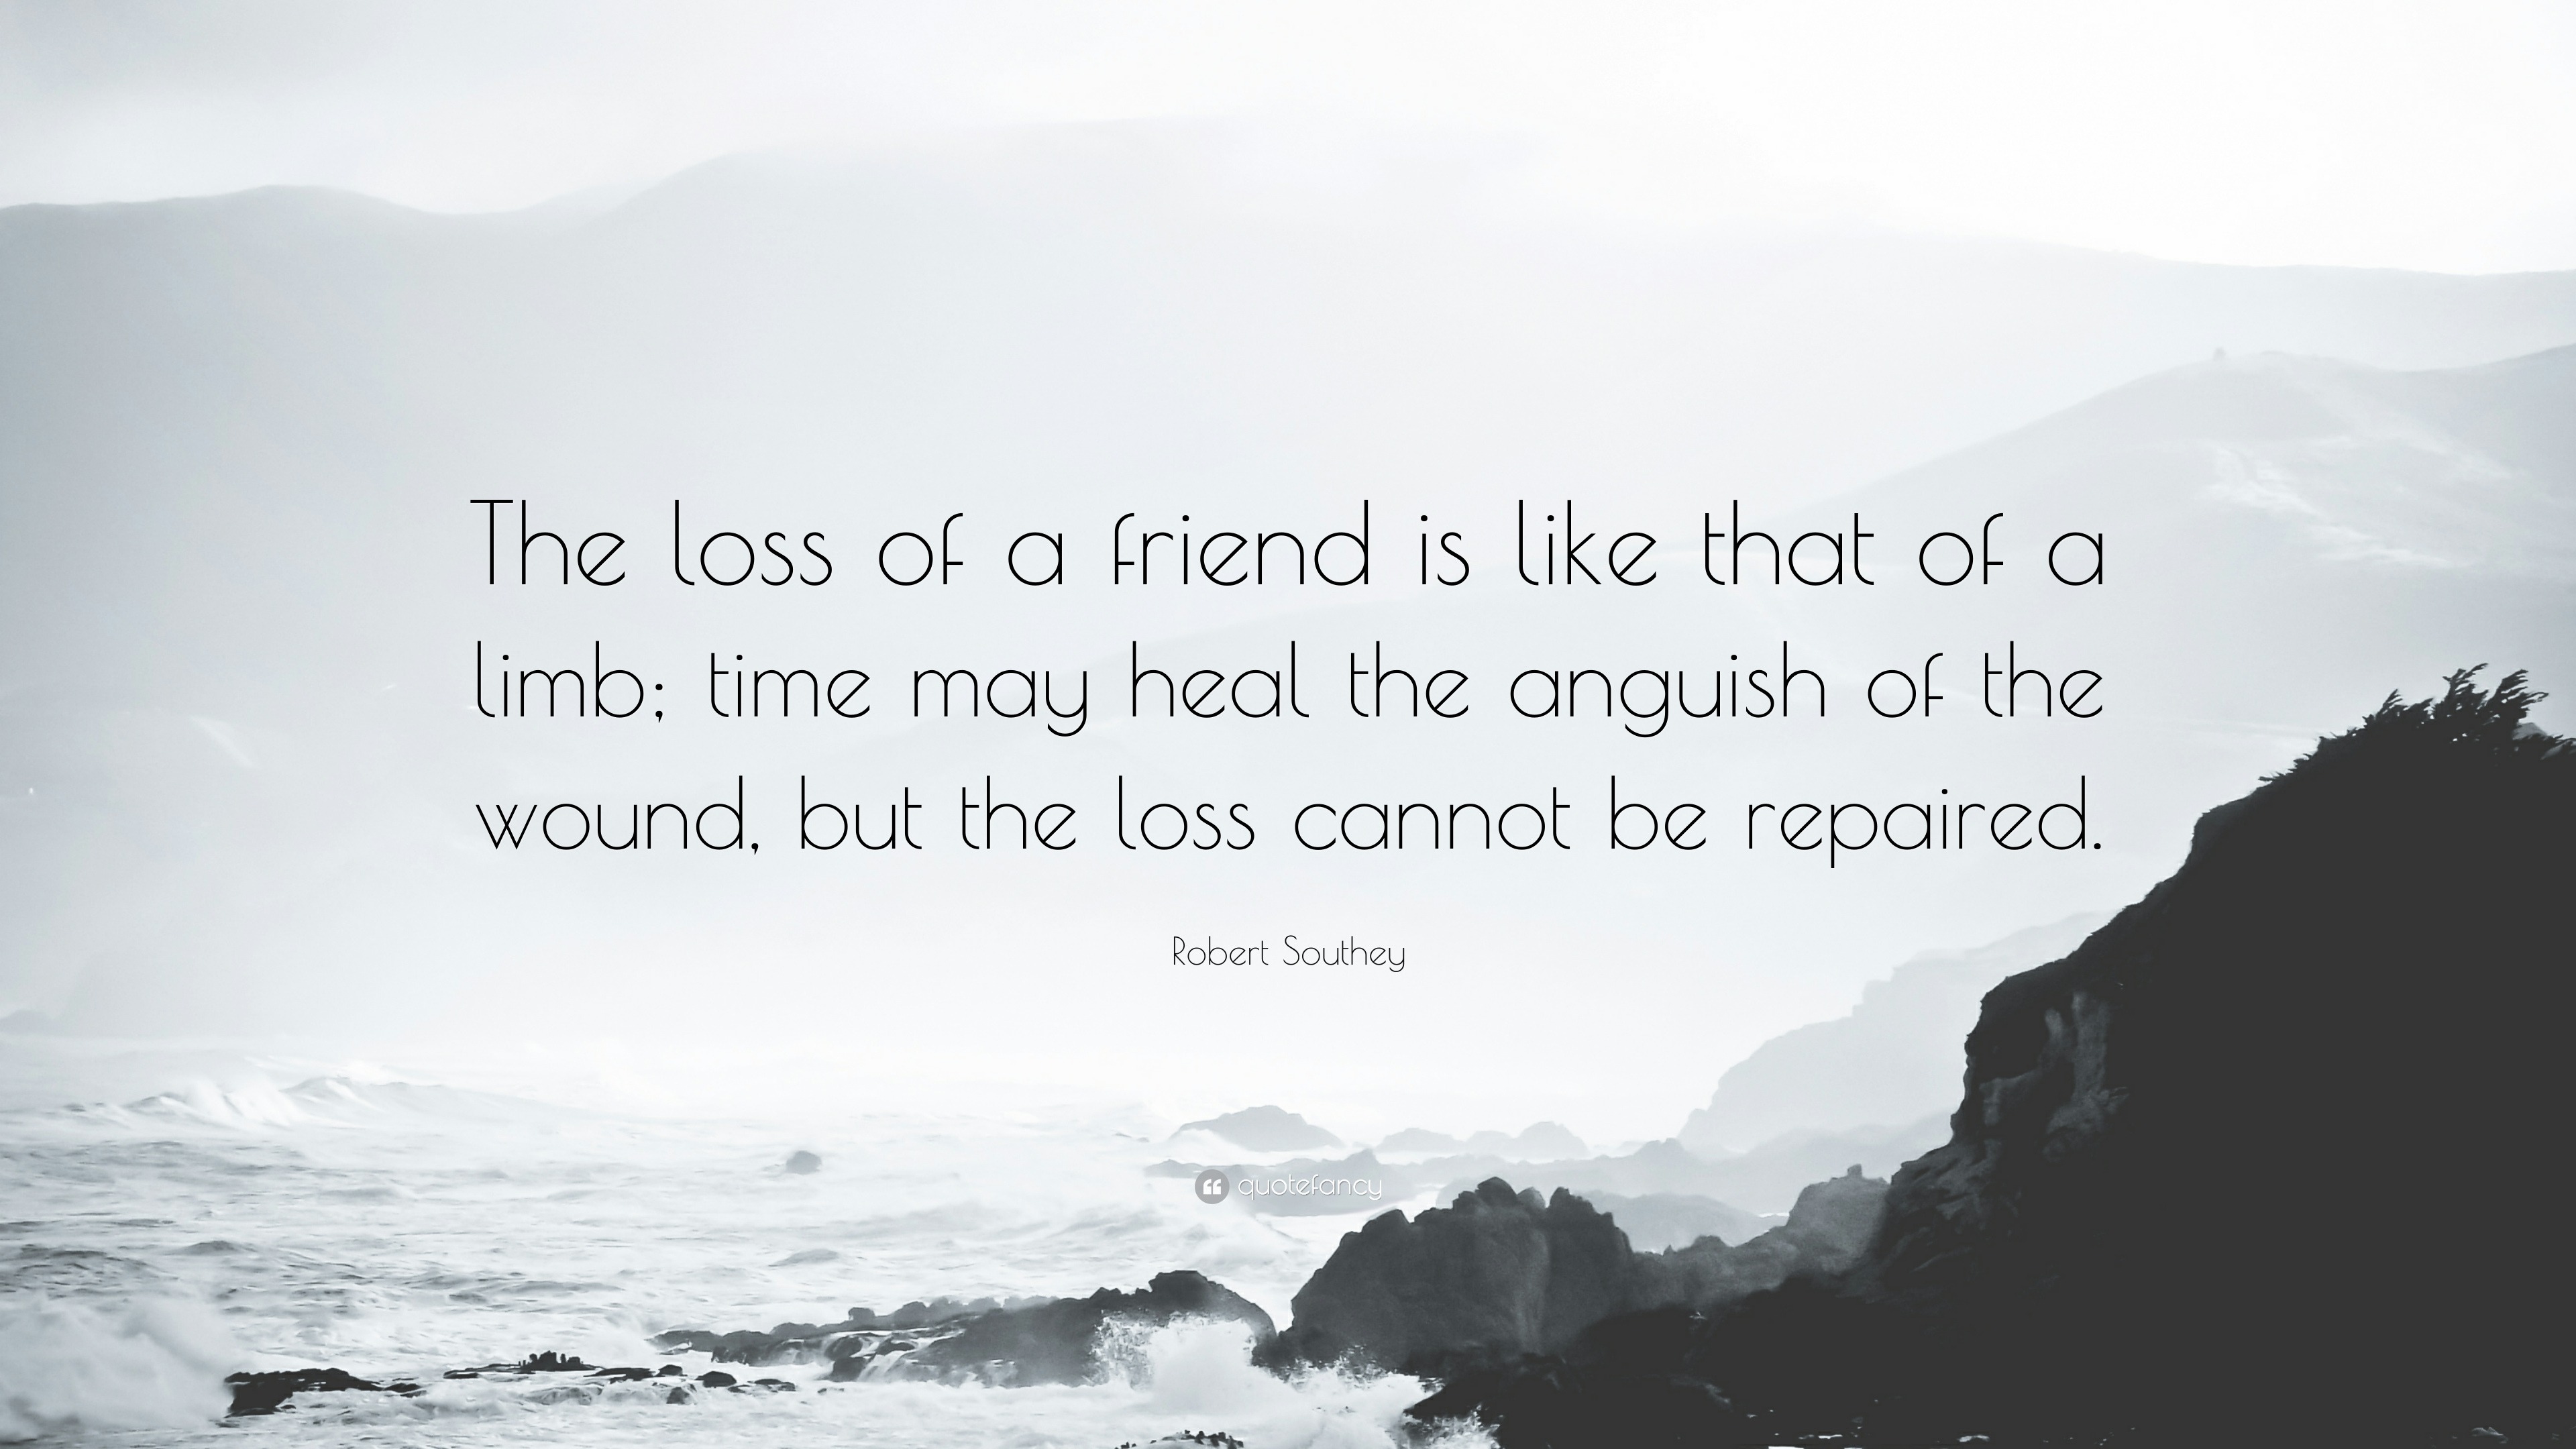 Robert Southey Quote: “The loss of a friend is like that of a limb ...